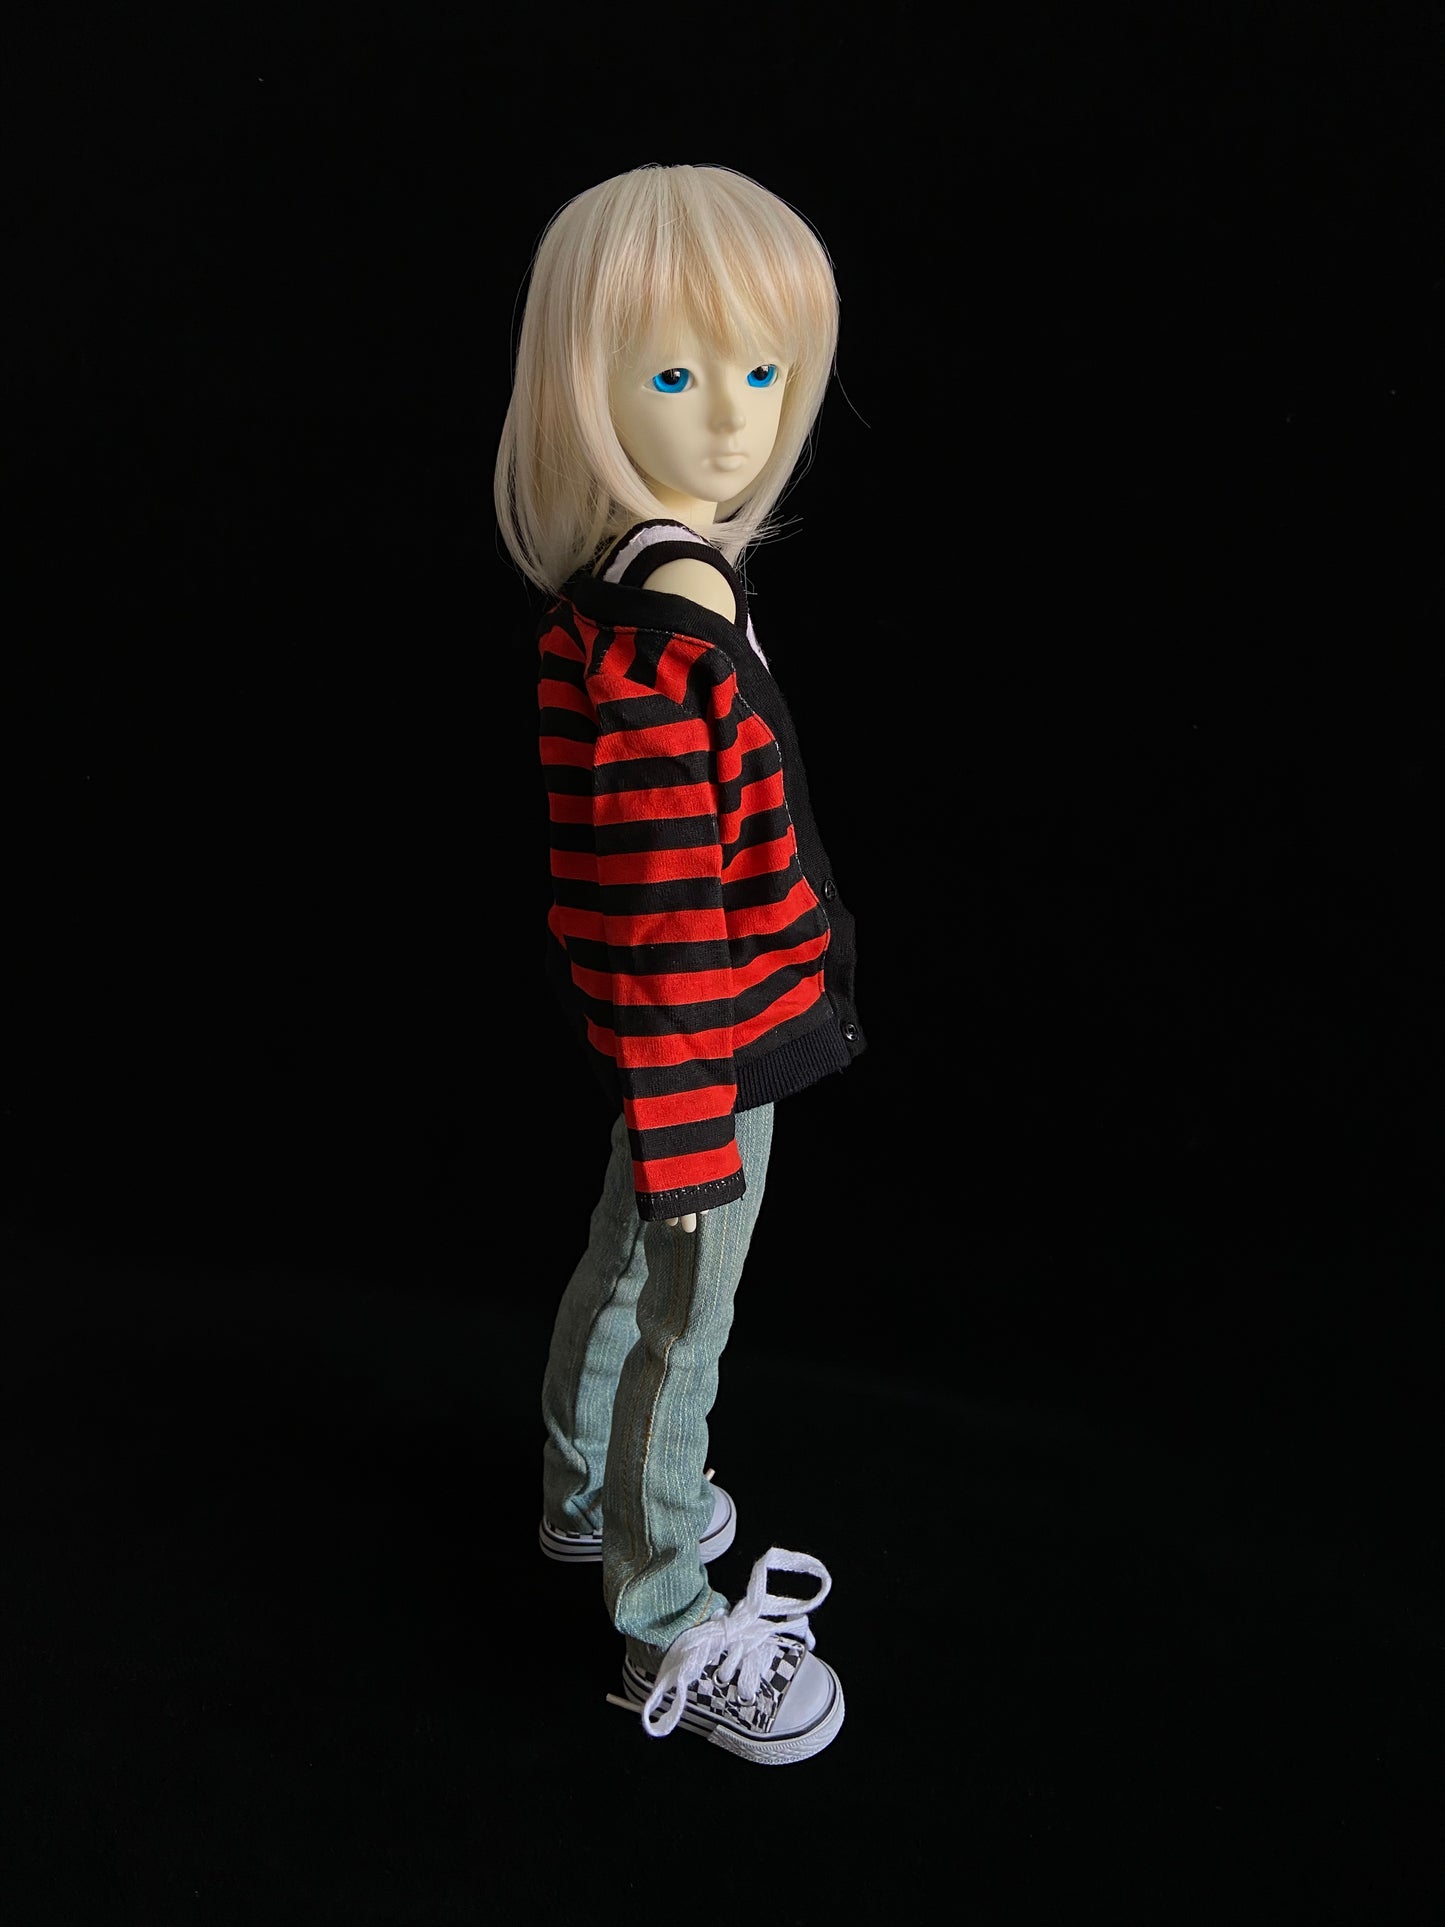 1/4 boy doll Henry with shown items